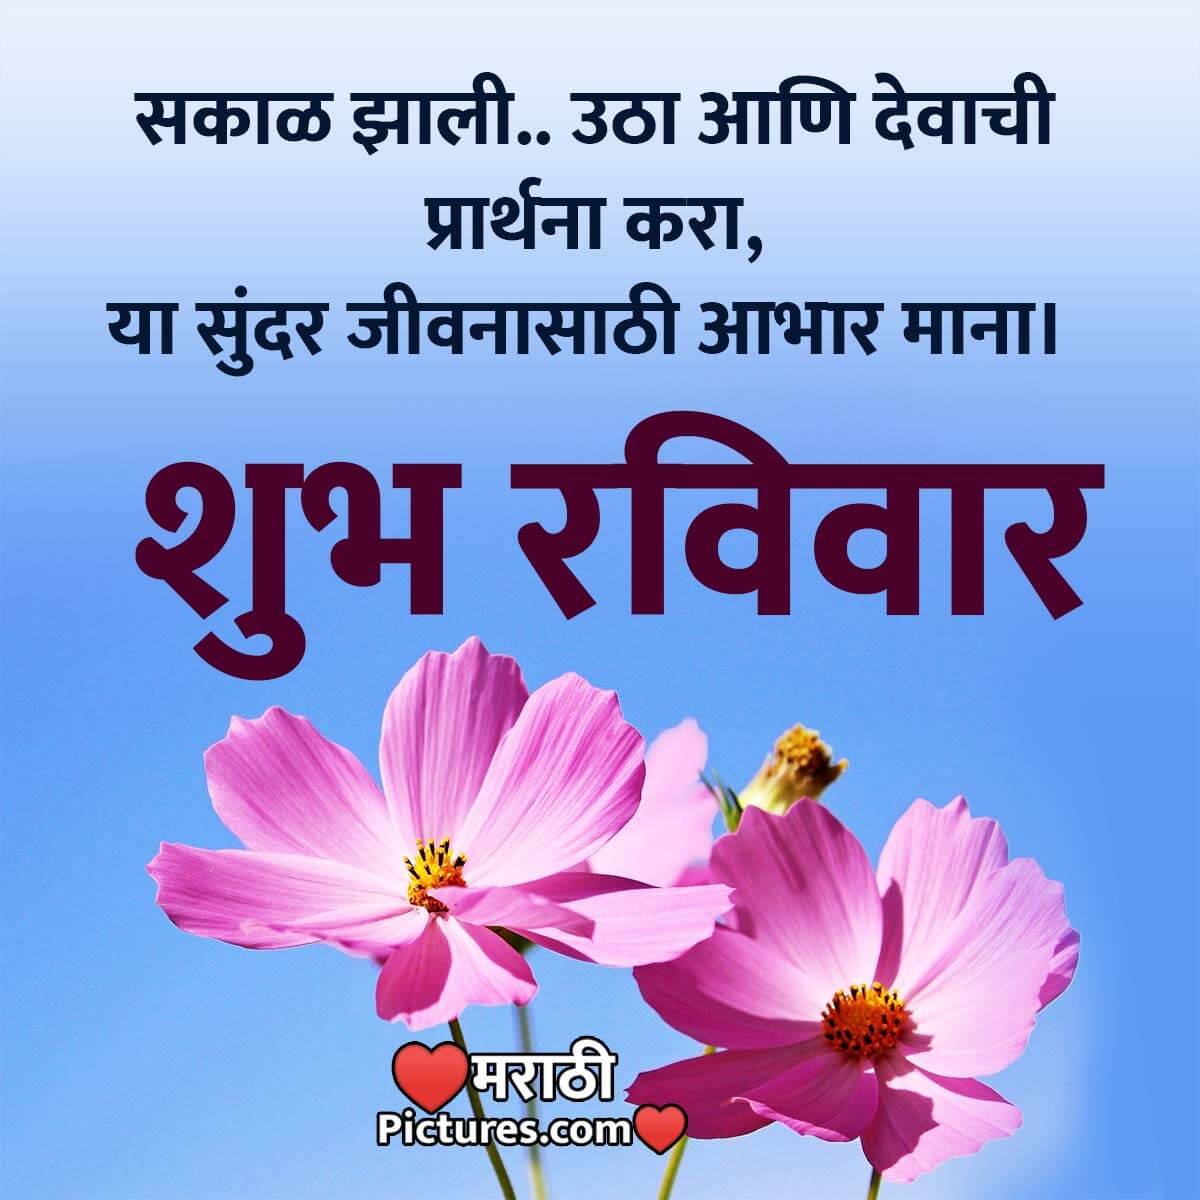 Sunday Marathi Quotes And Messages